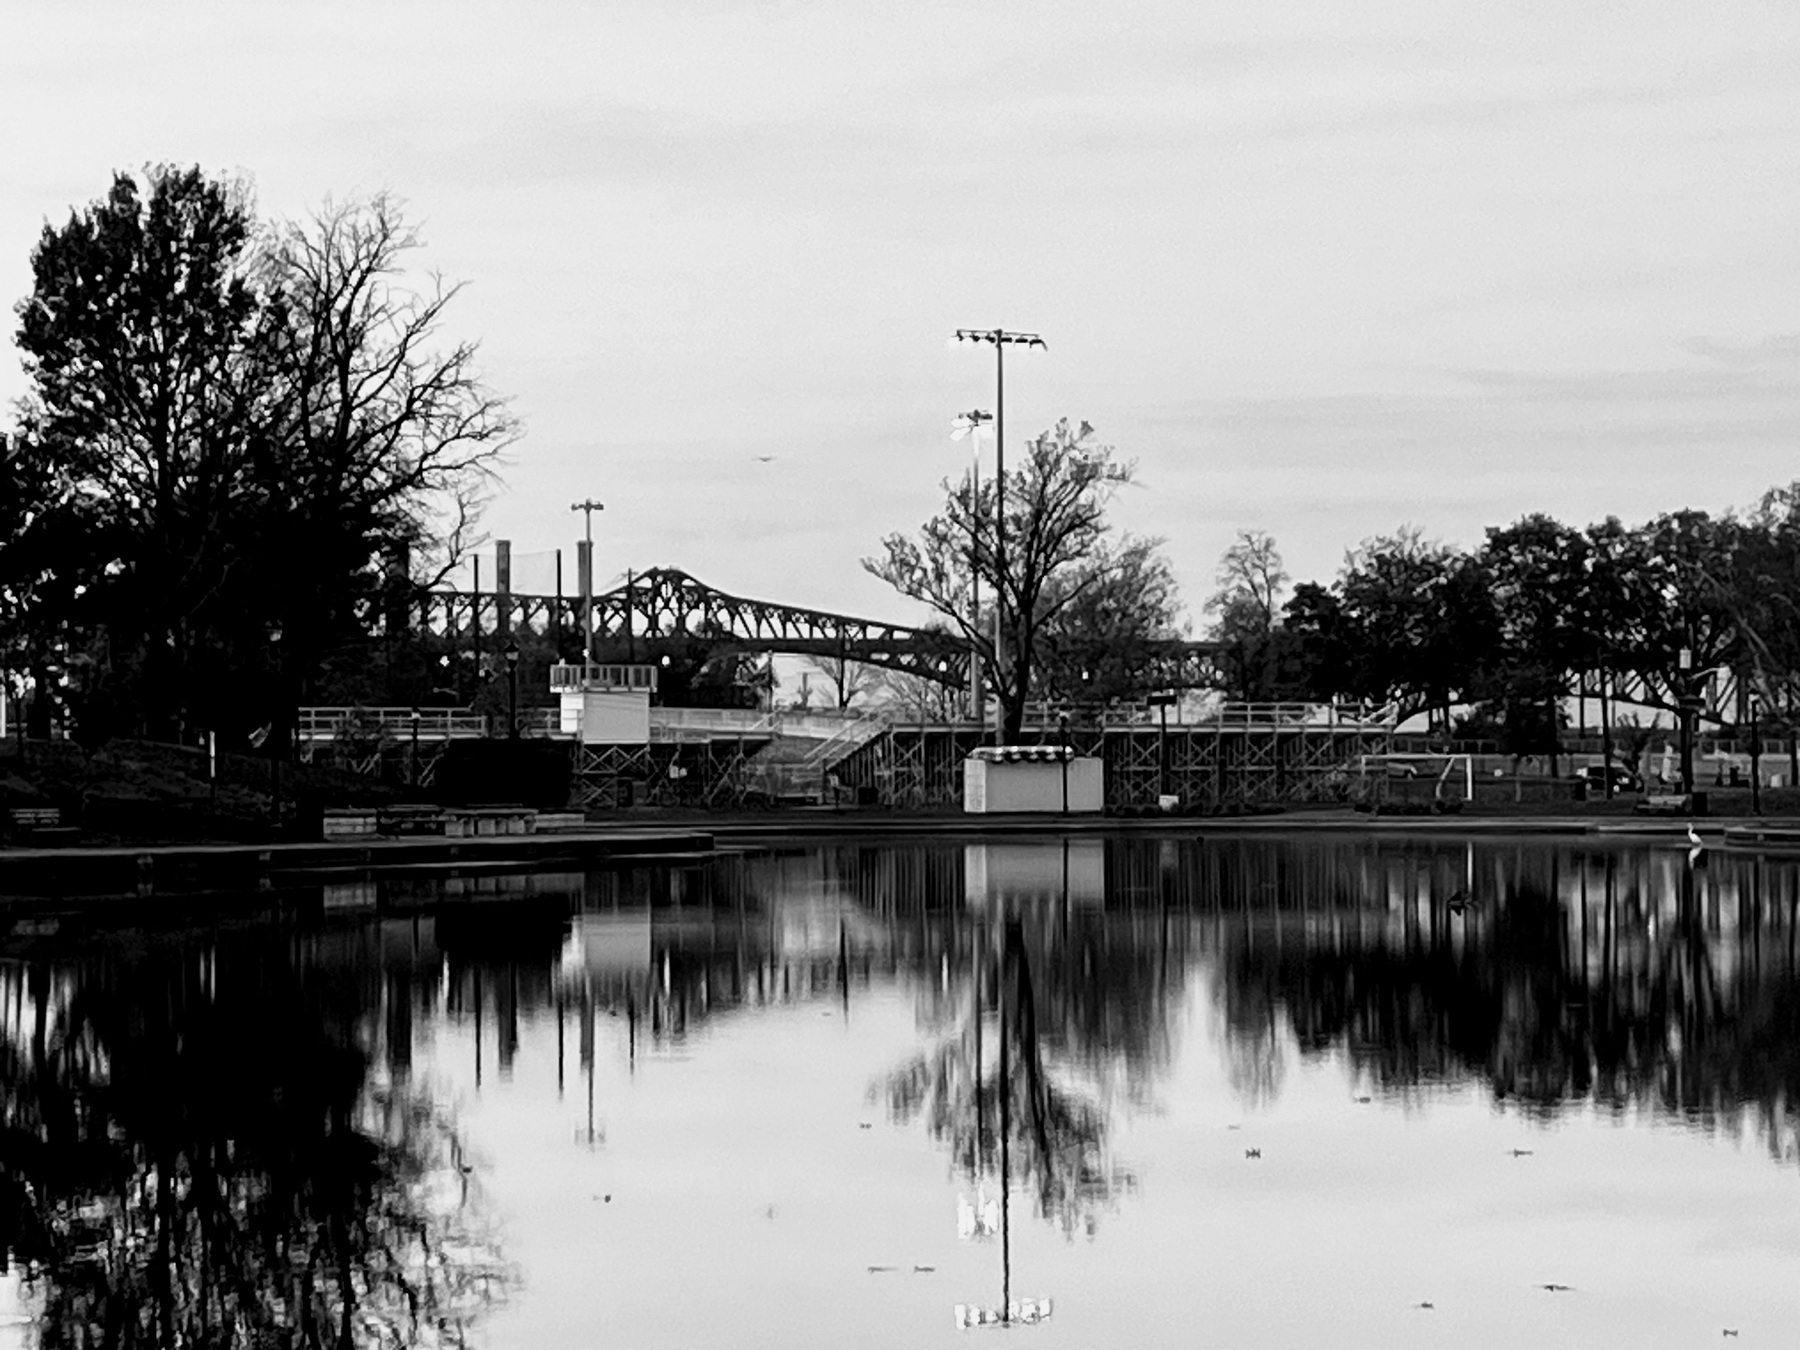 A moody black and white photo. A pond in the foreground, trees, a grandstand, and a metal suspension bridge behind. 